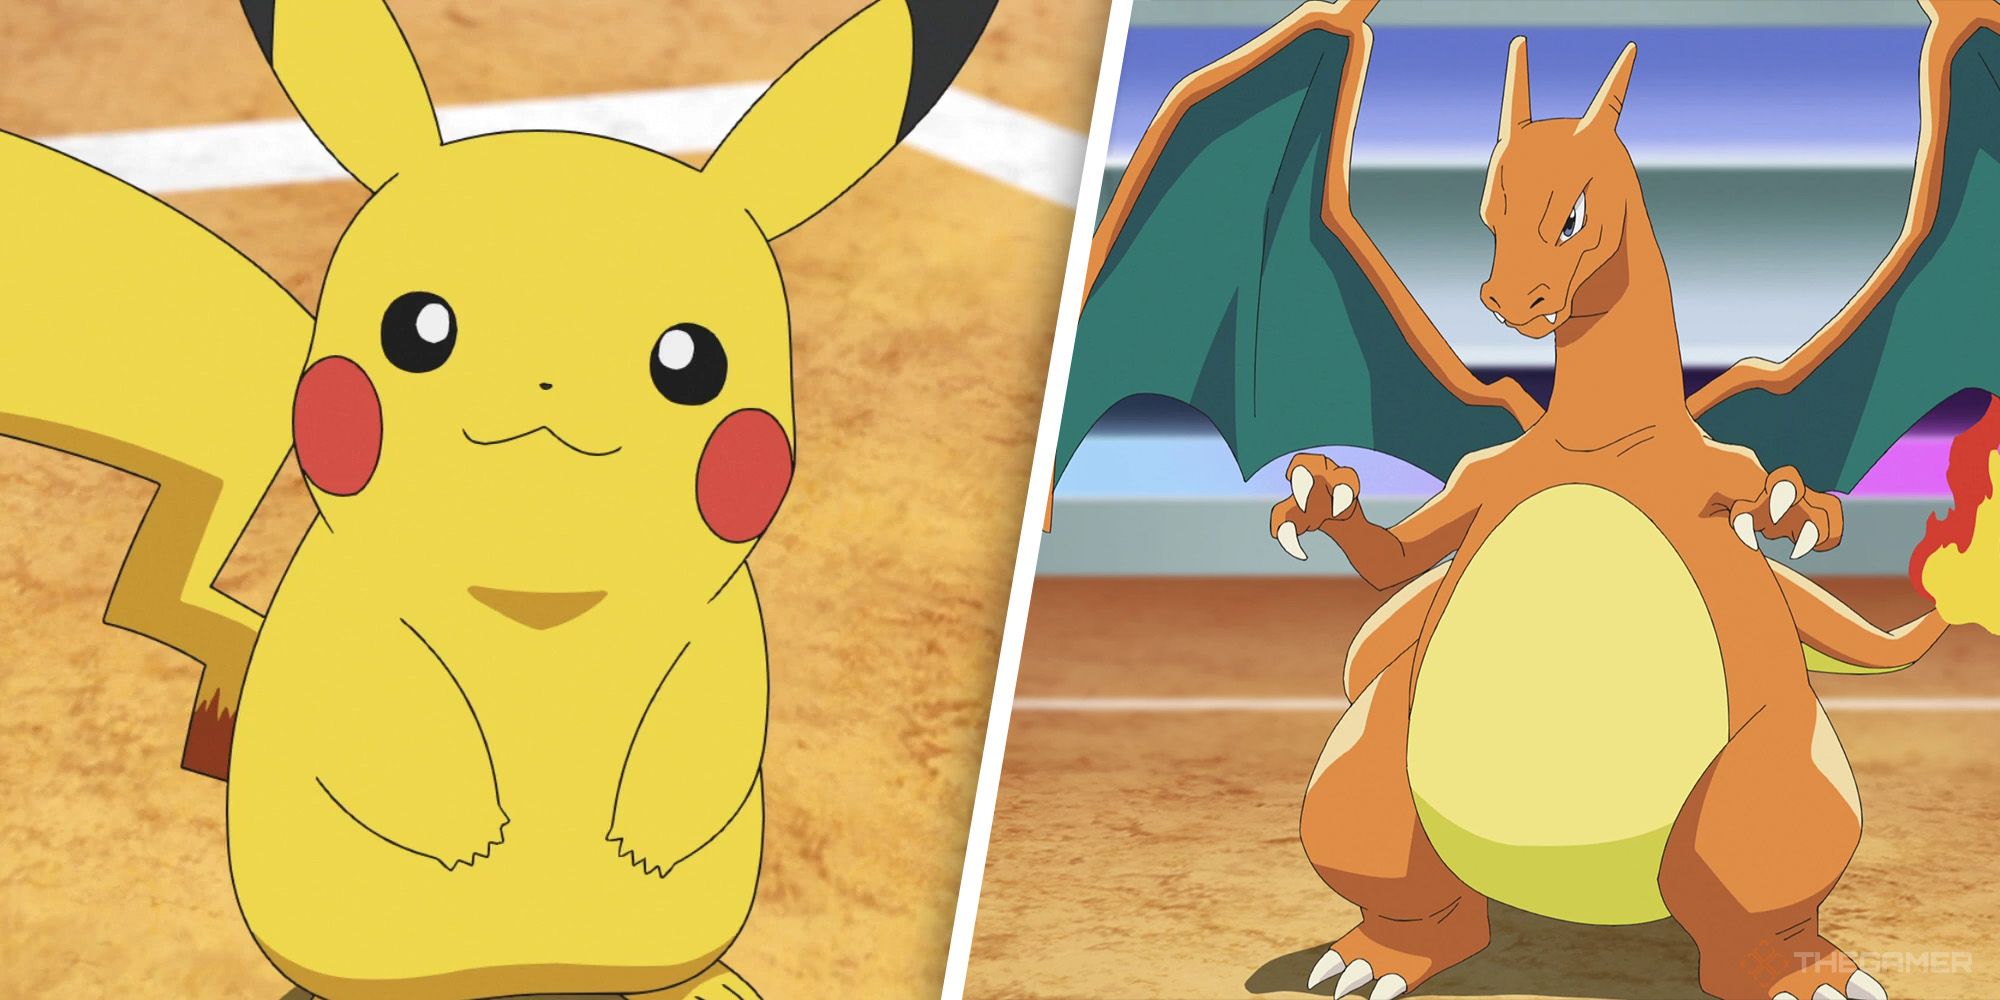 Pikachu and Charizard from the Pokemon anime series